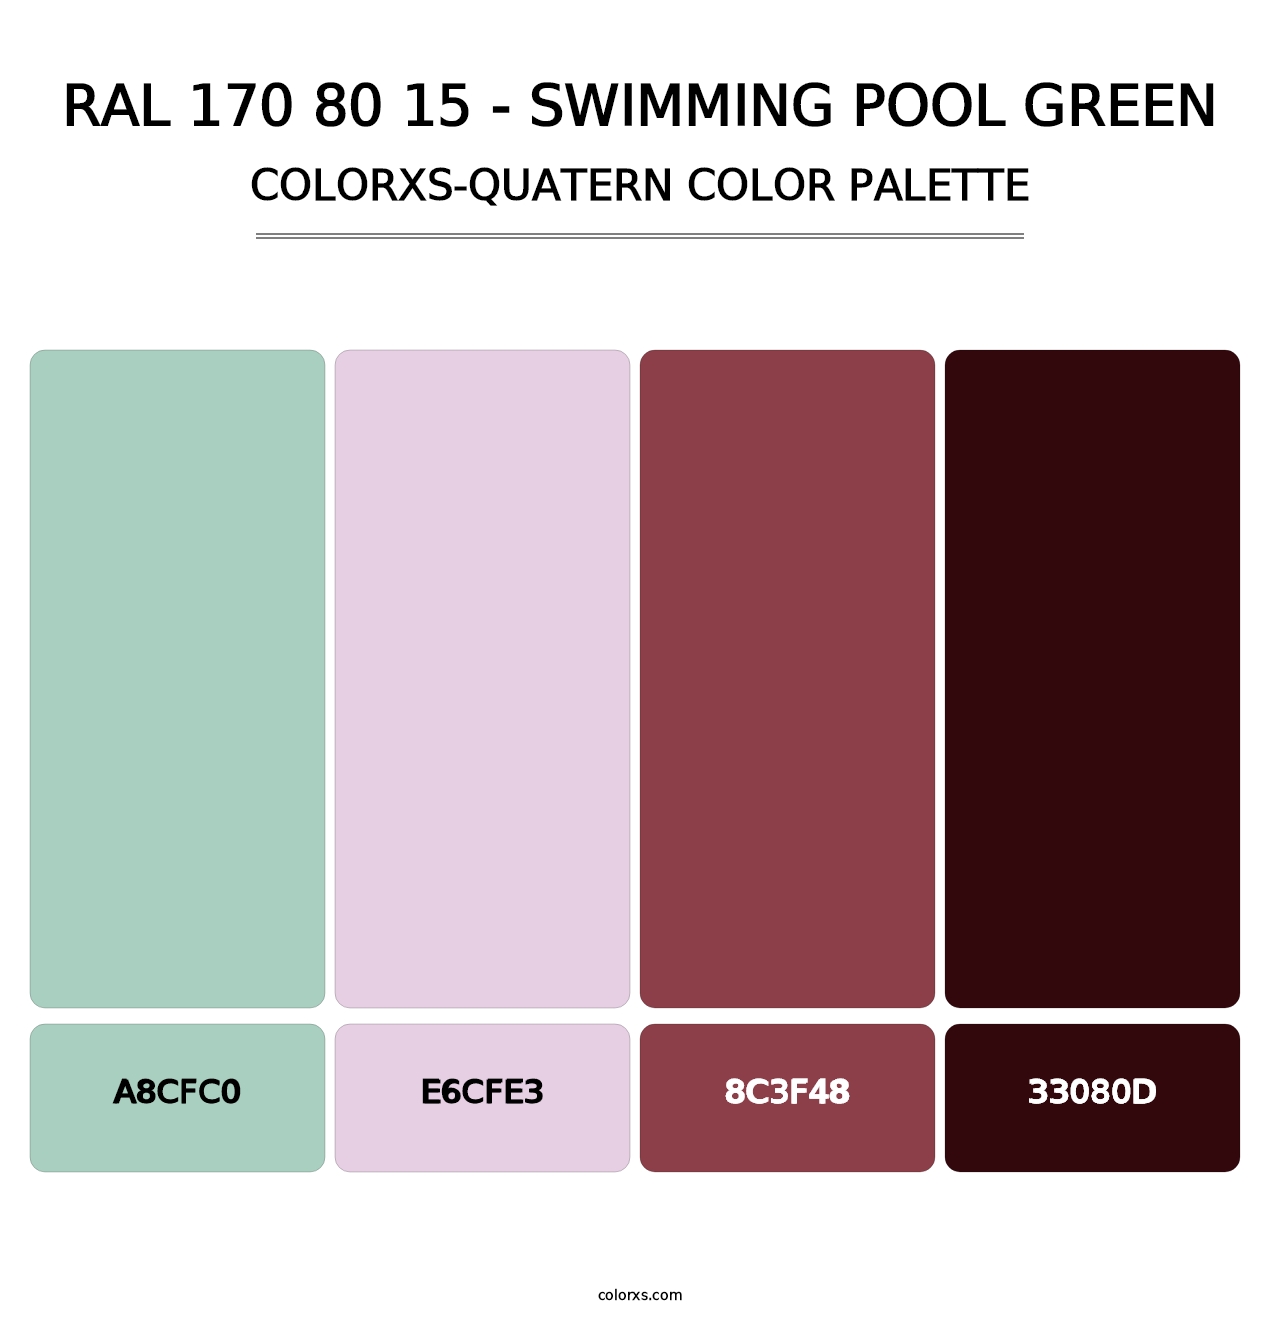 RAL 170 80 15 - Swimming Pool Green - Colorxs Quatern Palette